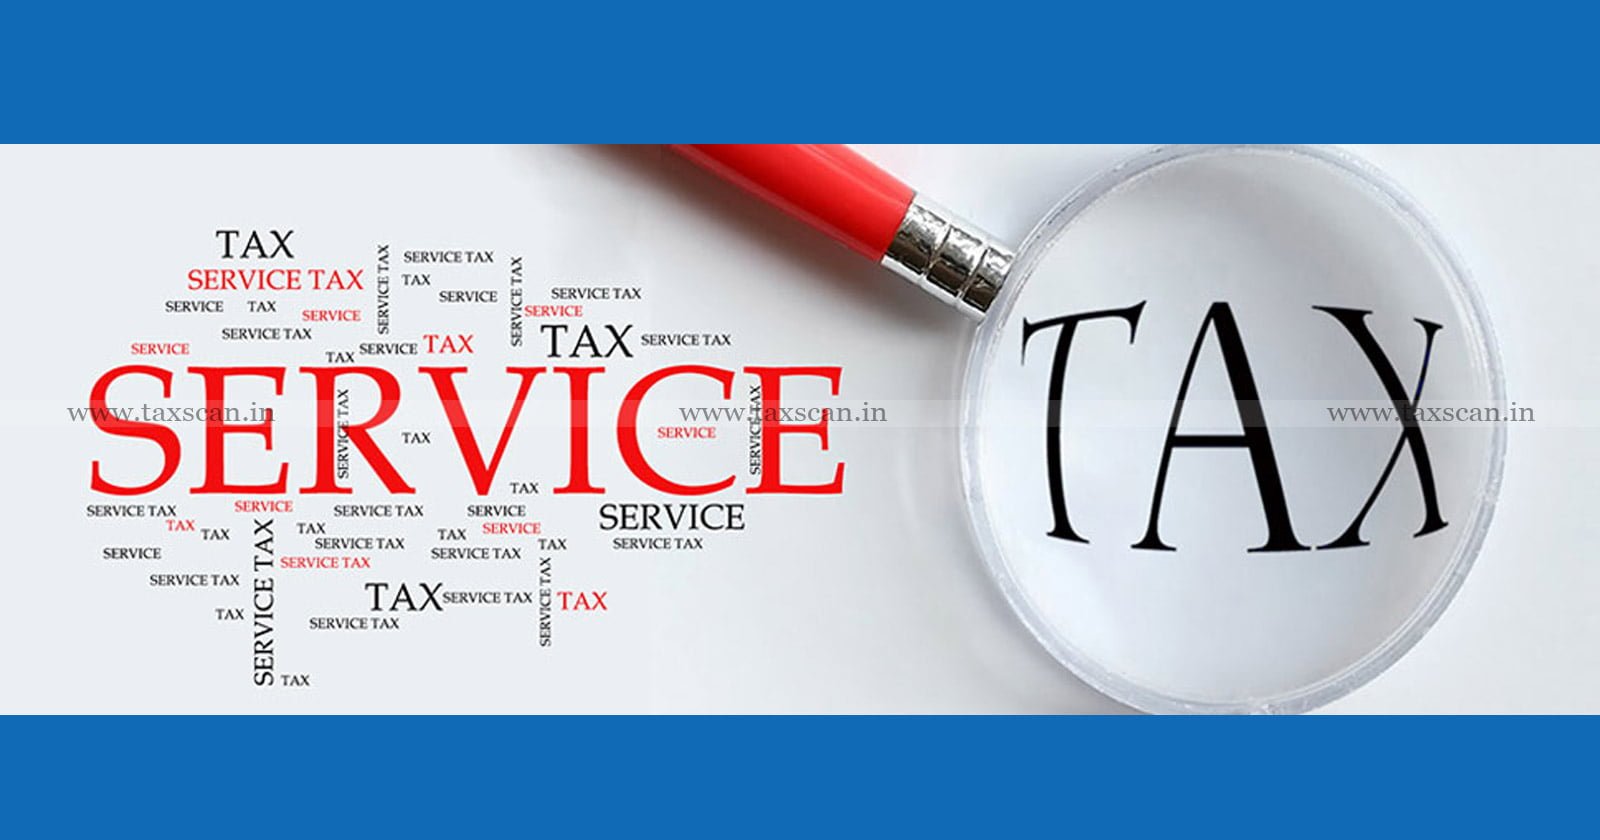 Service Tax - Construction - Residential Complexes - Service - Works Contract - CESTAT - Customs - Excise - Taxscan